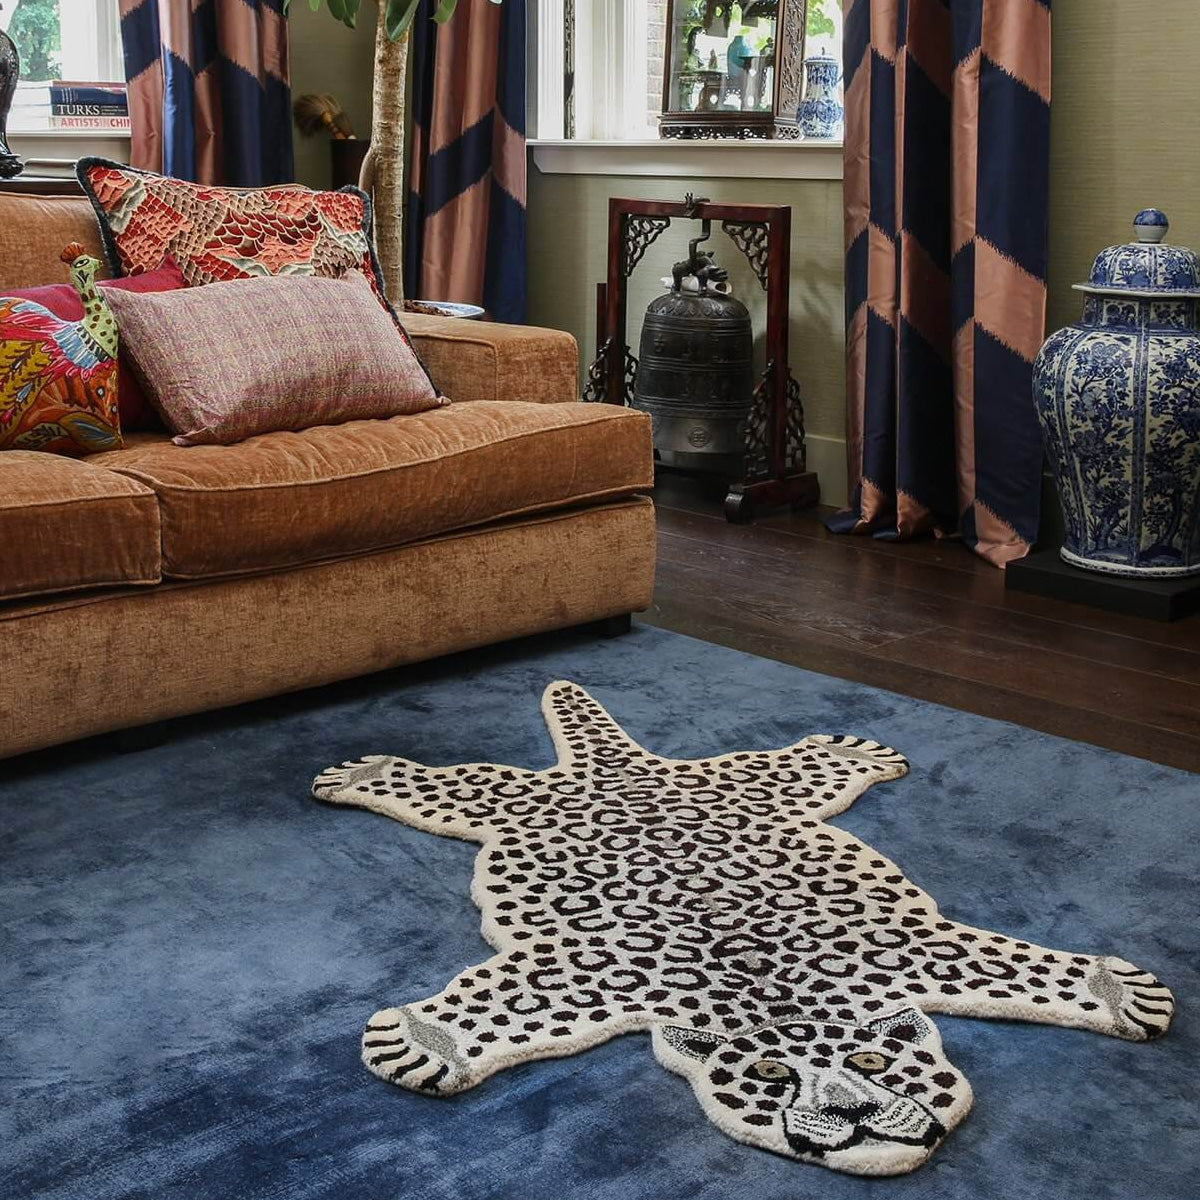 Snowy Leopard Rug Large - Doing Goods